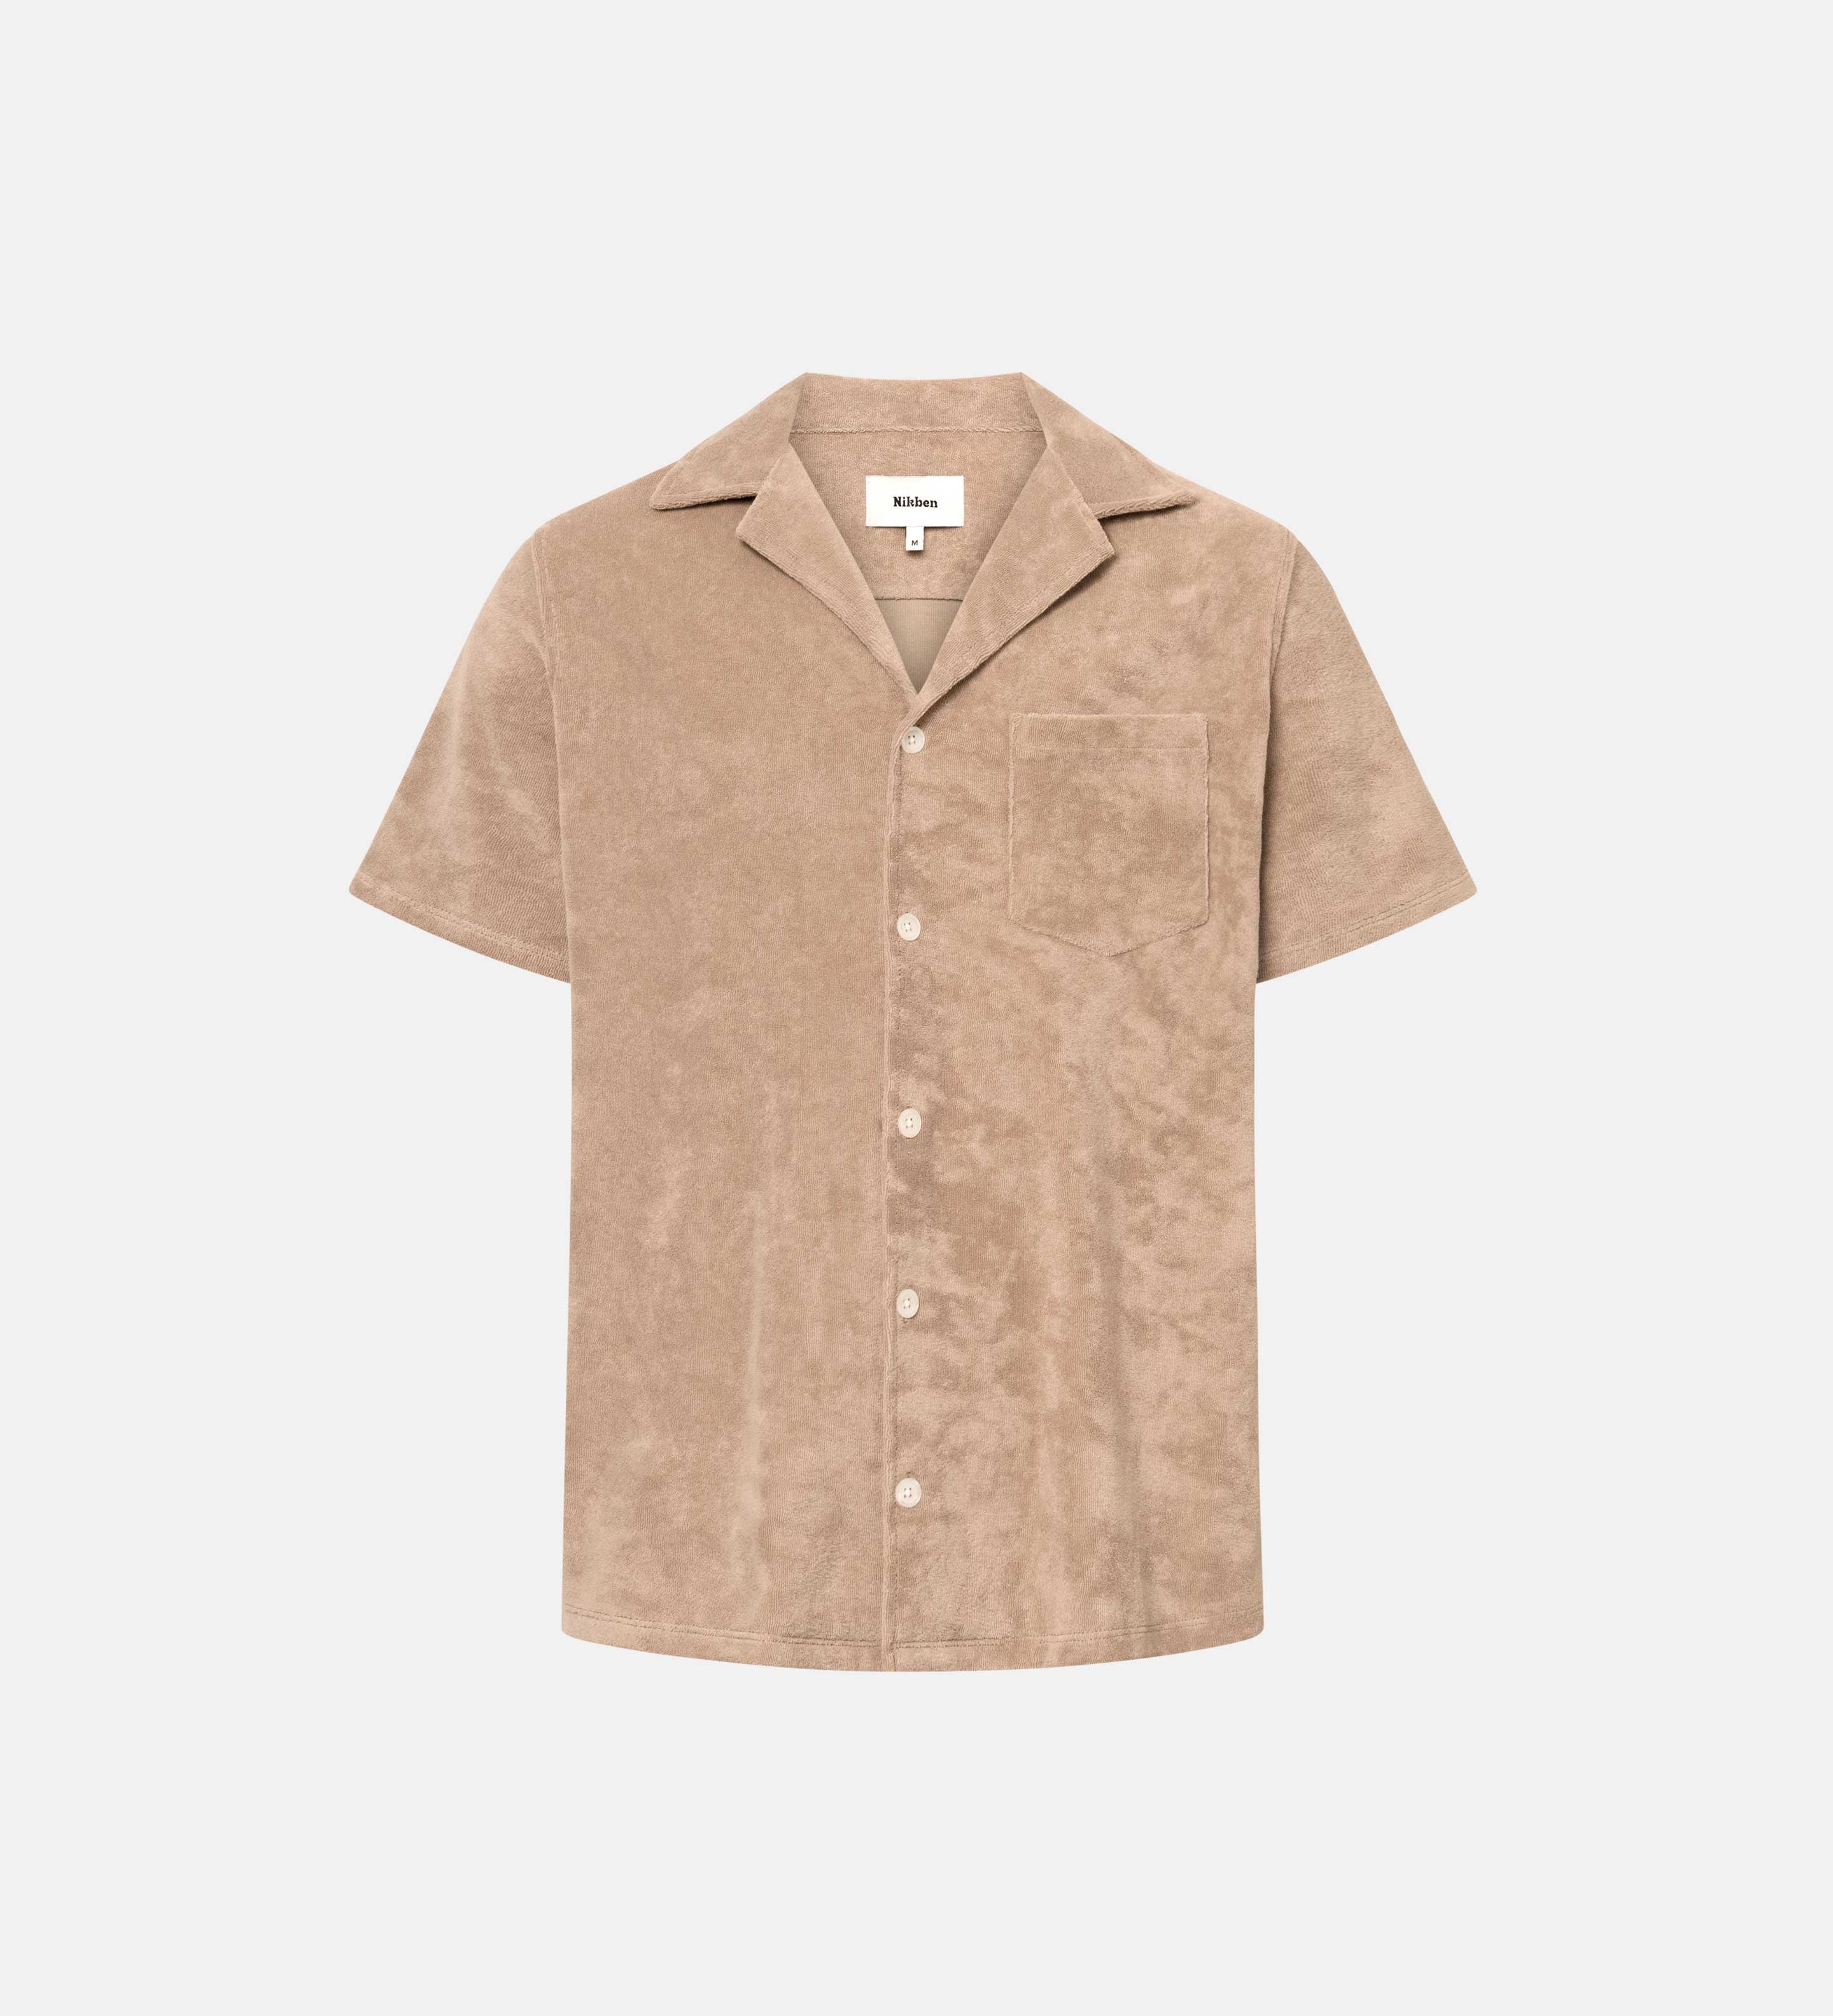 Light brown short sleeve shirt with white button closure and one chest pocket